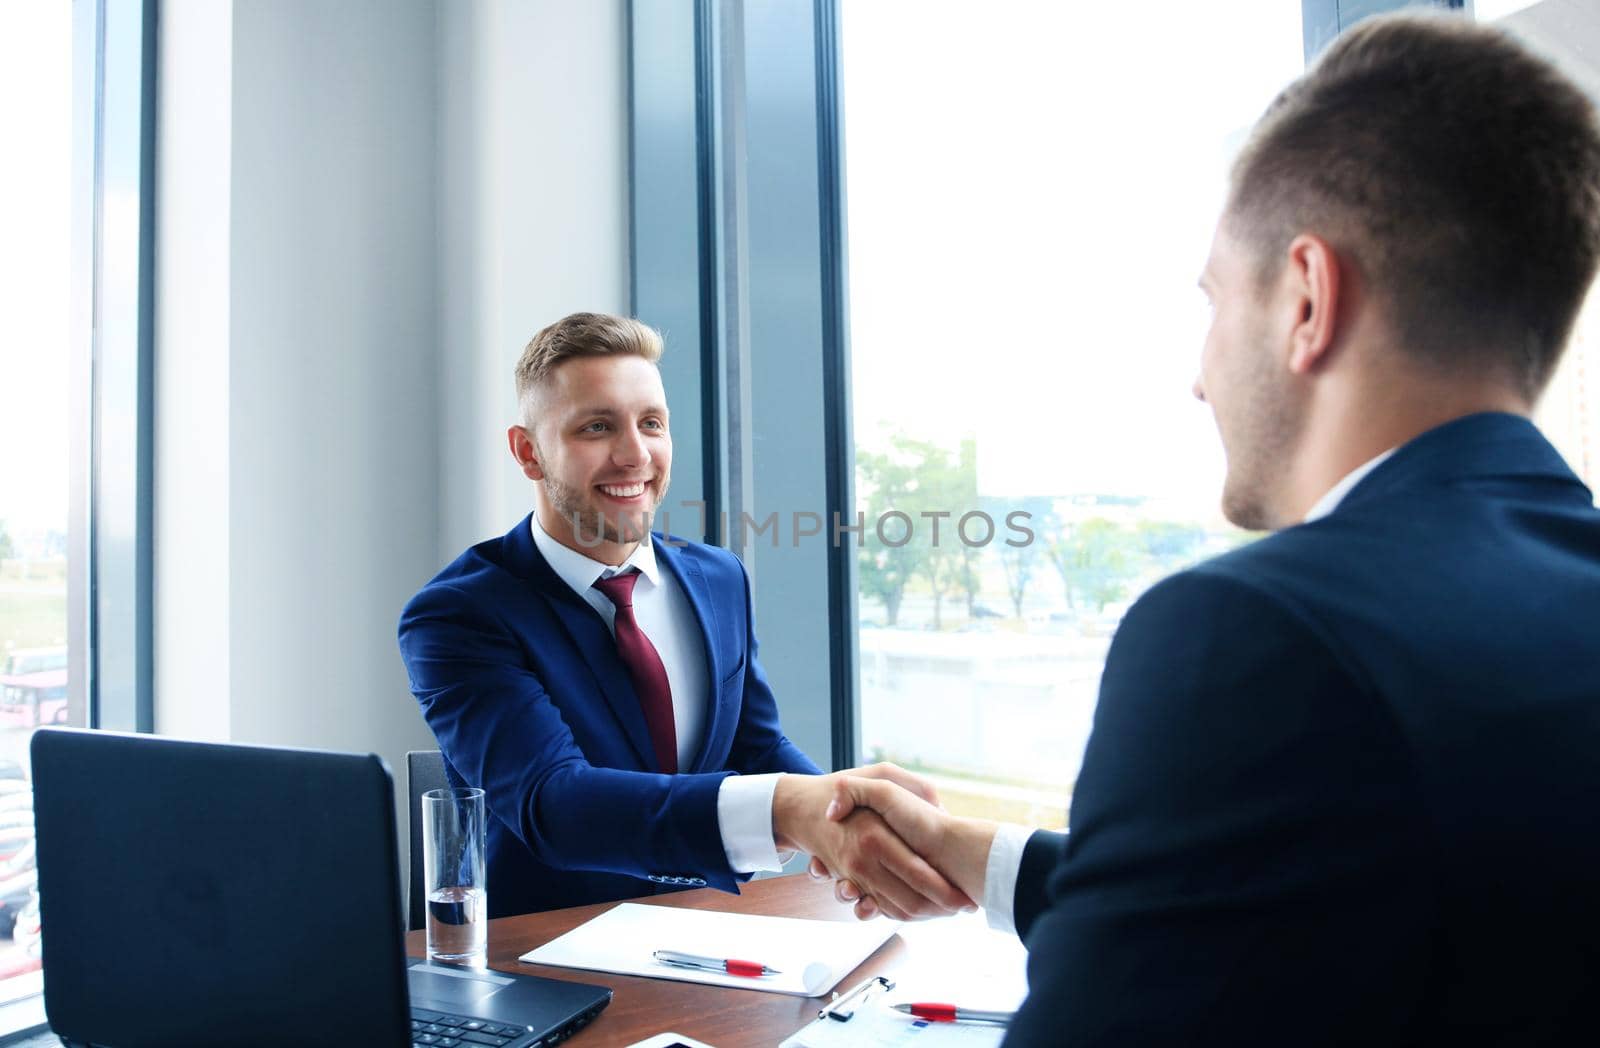 Business handshake. Two businessman shaking hands in the office.